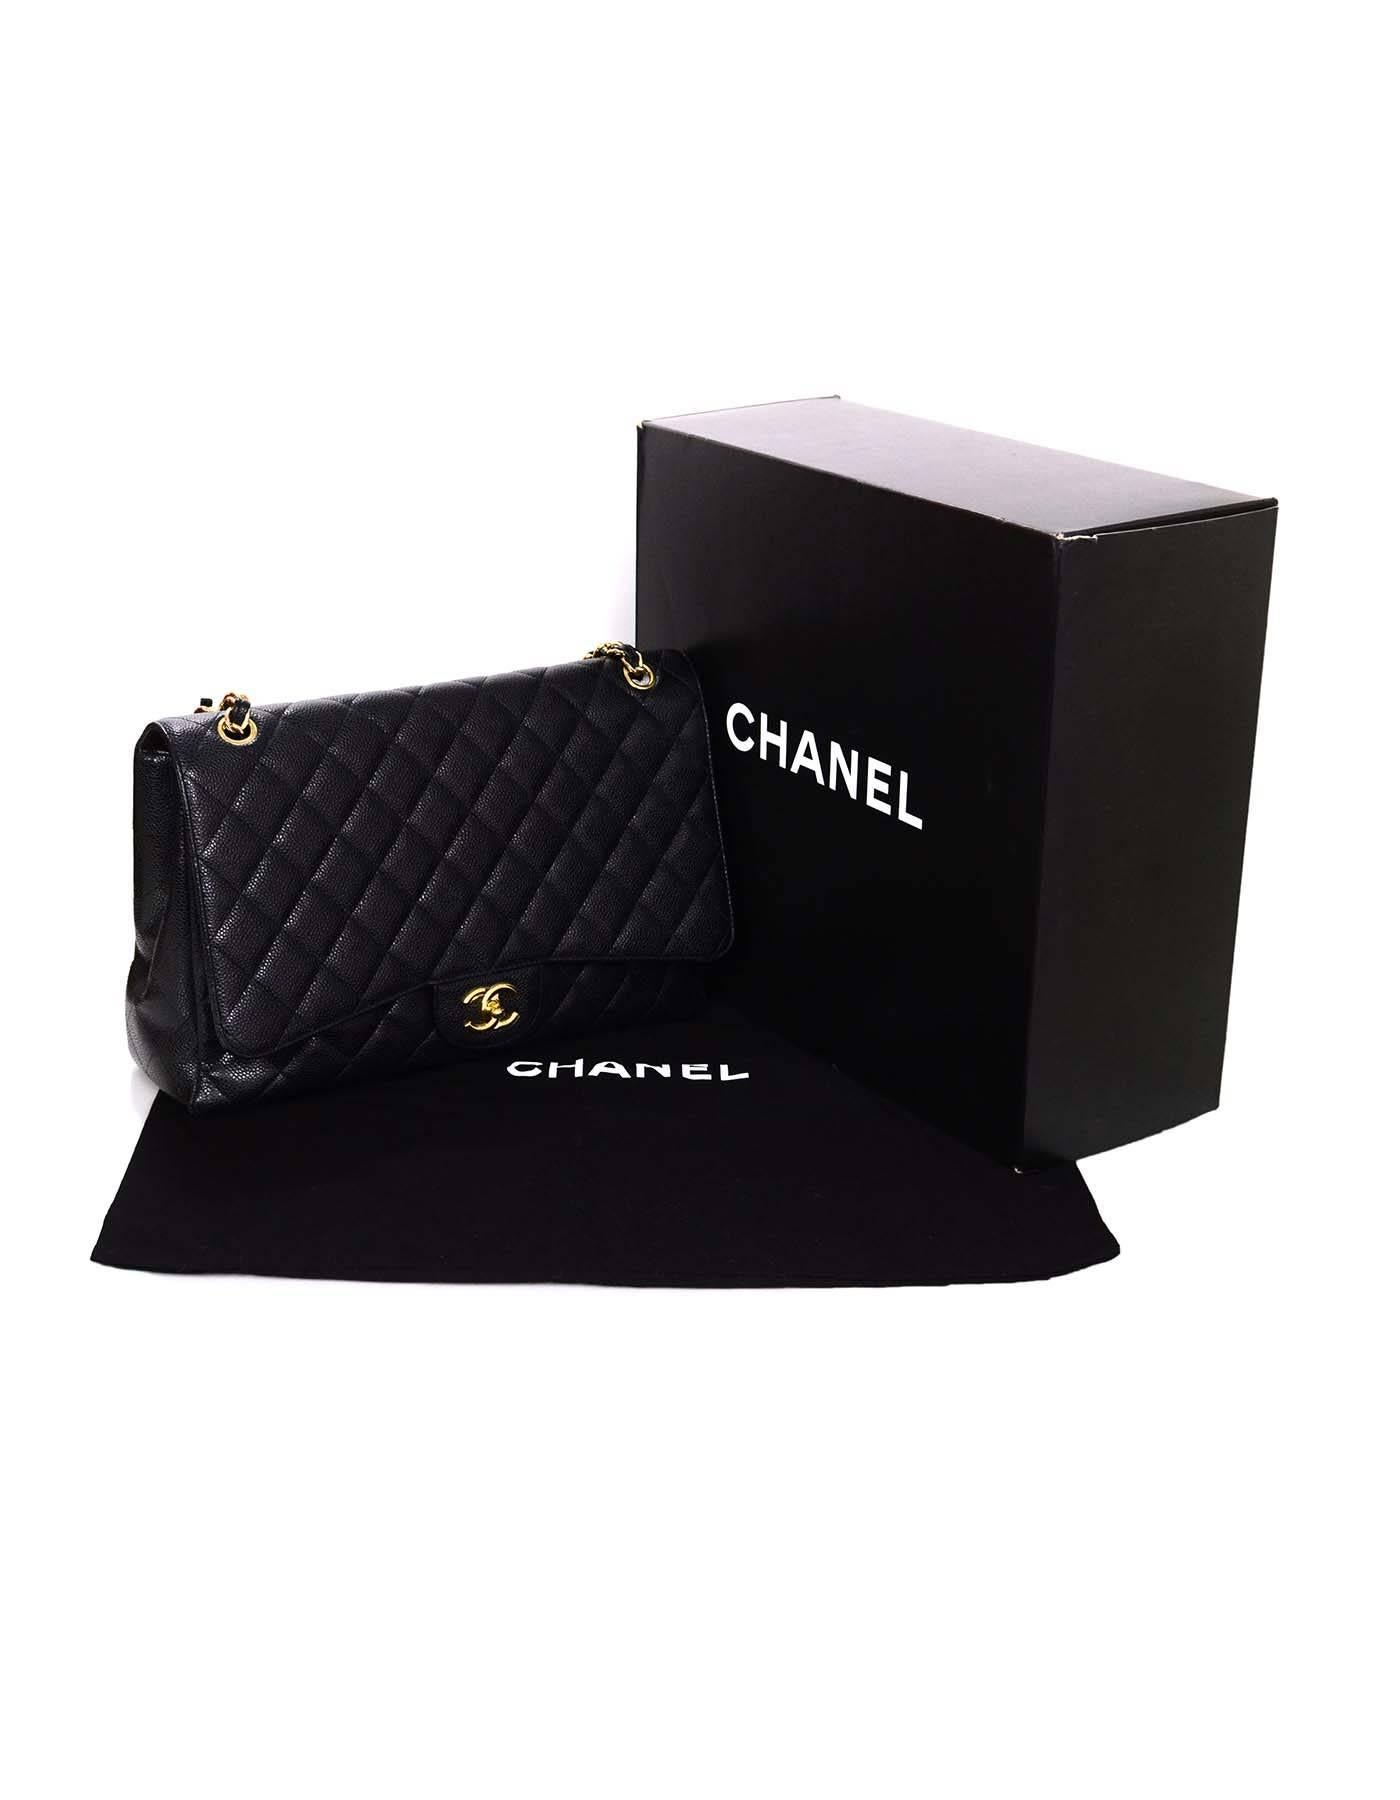 Chanel Black Caviar Leather Quilted Single Flap Maxi Bag GHW rt. $6, 000 4